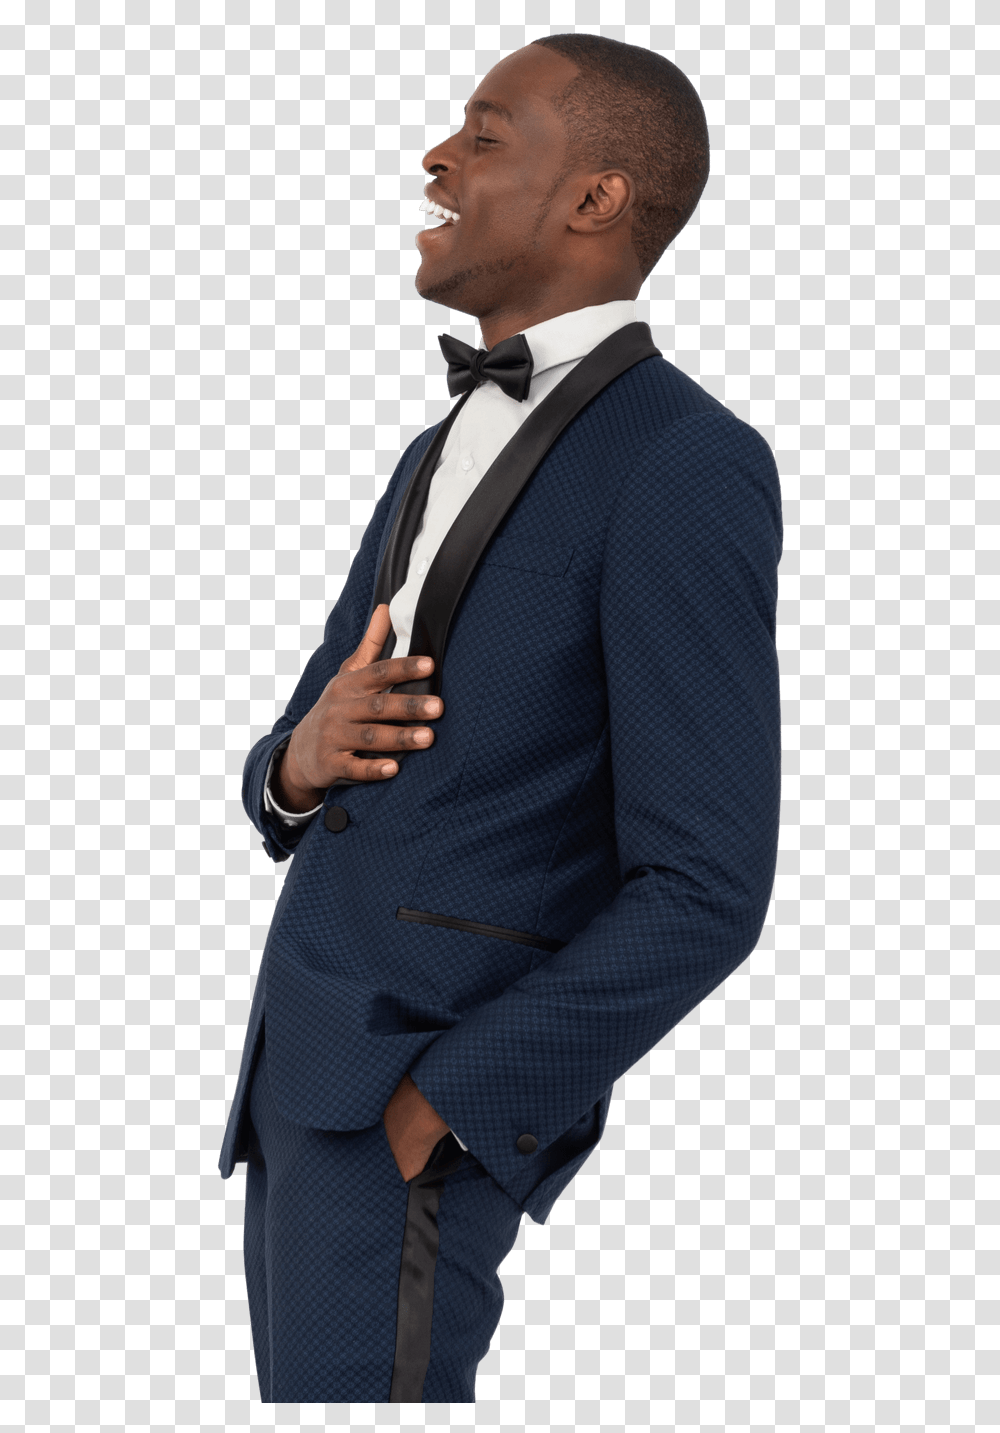 Men Full Man Standing And Laughing, Apparel, Suit, Overcoat Transparent Png